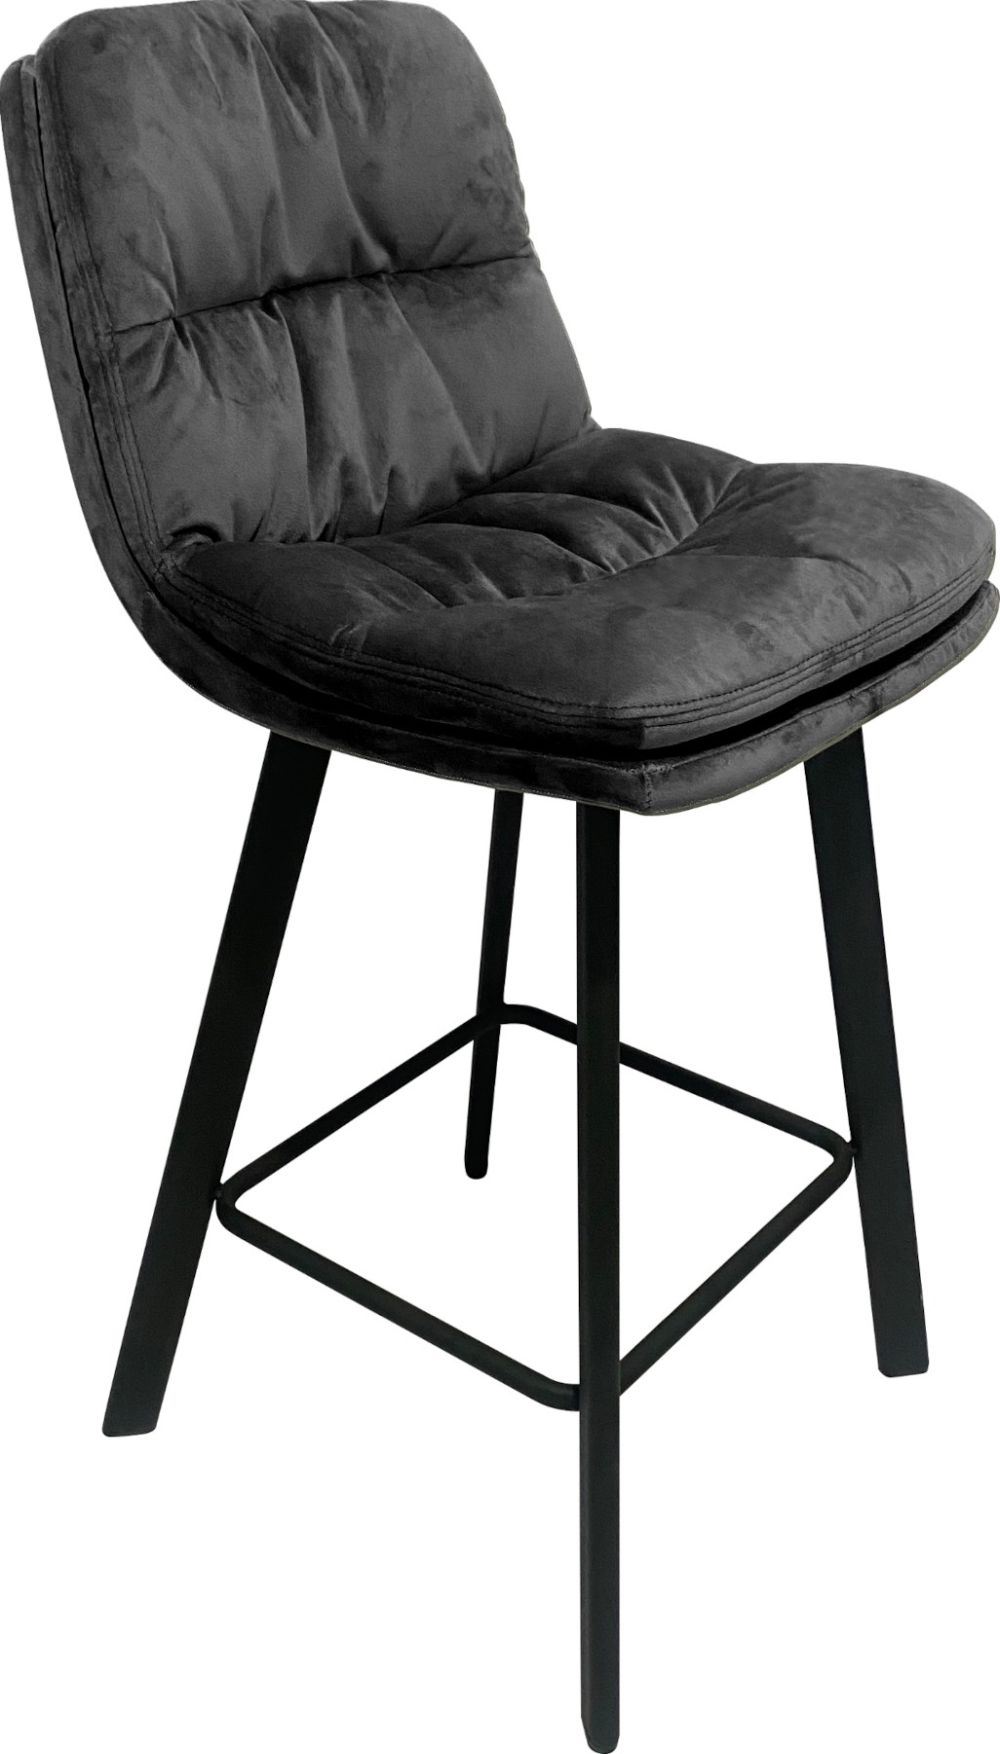 Paloma Charcoal Grey Velvet Bar Stool Sold In Pairs